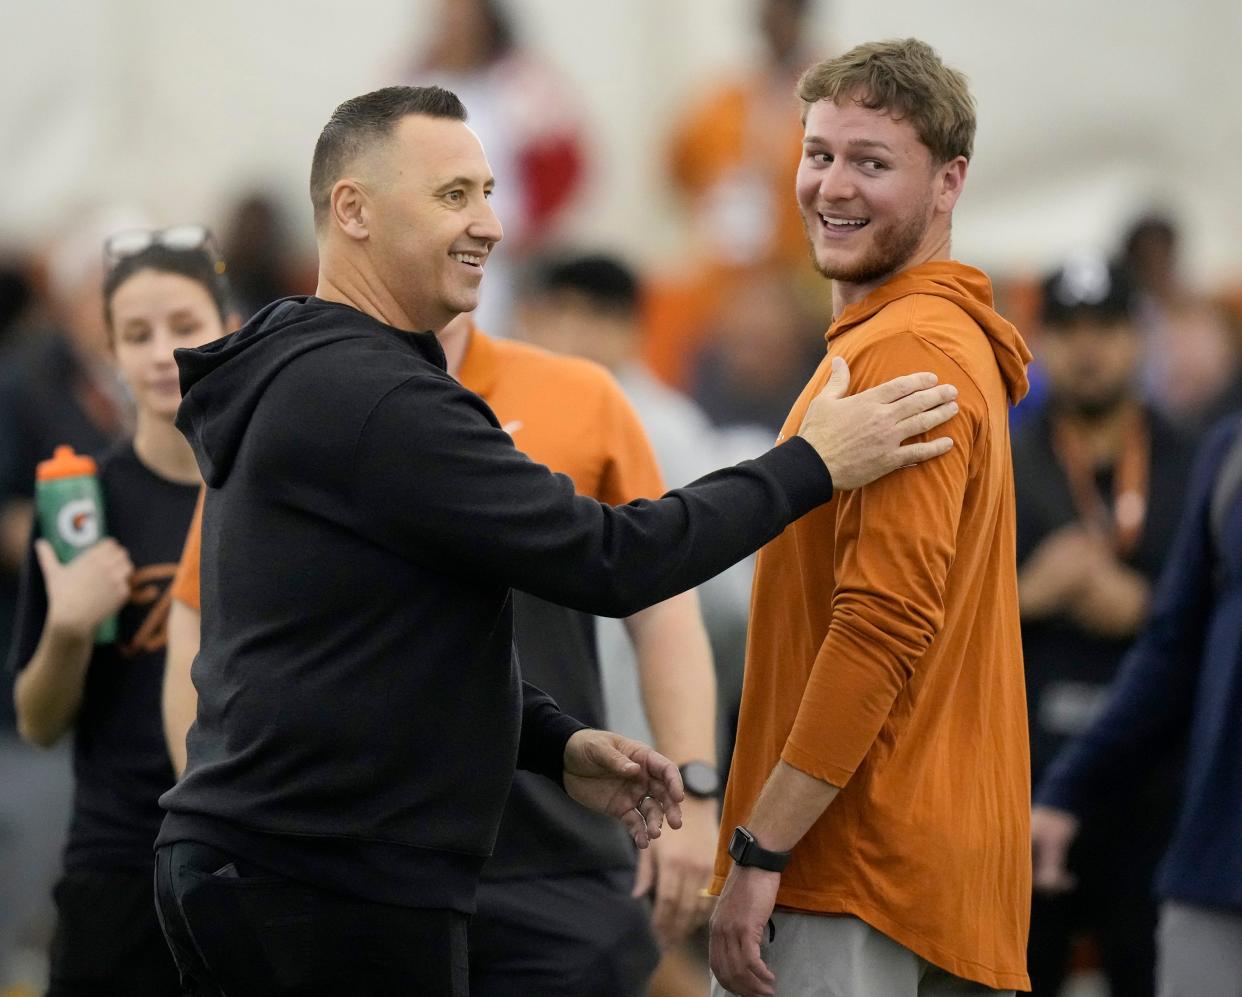 Texas head coach Steve Sarkisian greets quarterback Quinn Ewers at UT's pro timing day for NFL scouts on March 20. Ewers, who chose to return to school this year instead of enter the draft, threw passes for Texas' NFL hopefuls during pro day drills.